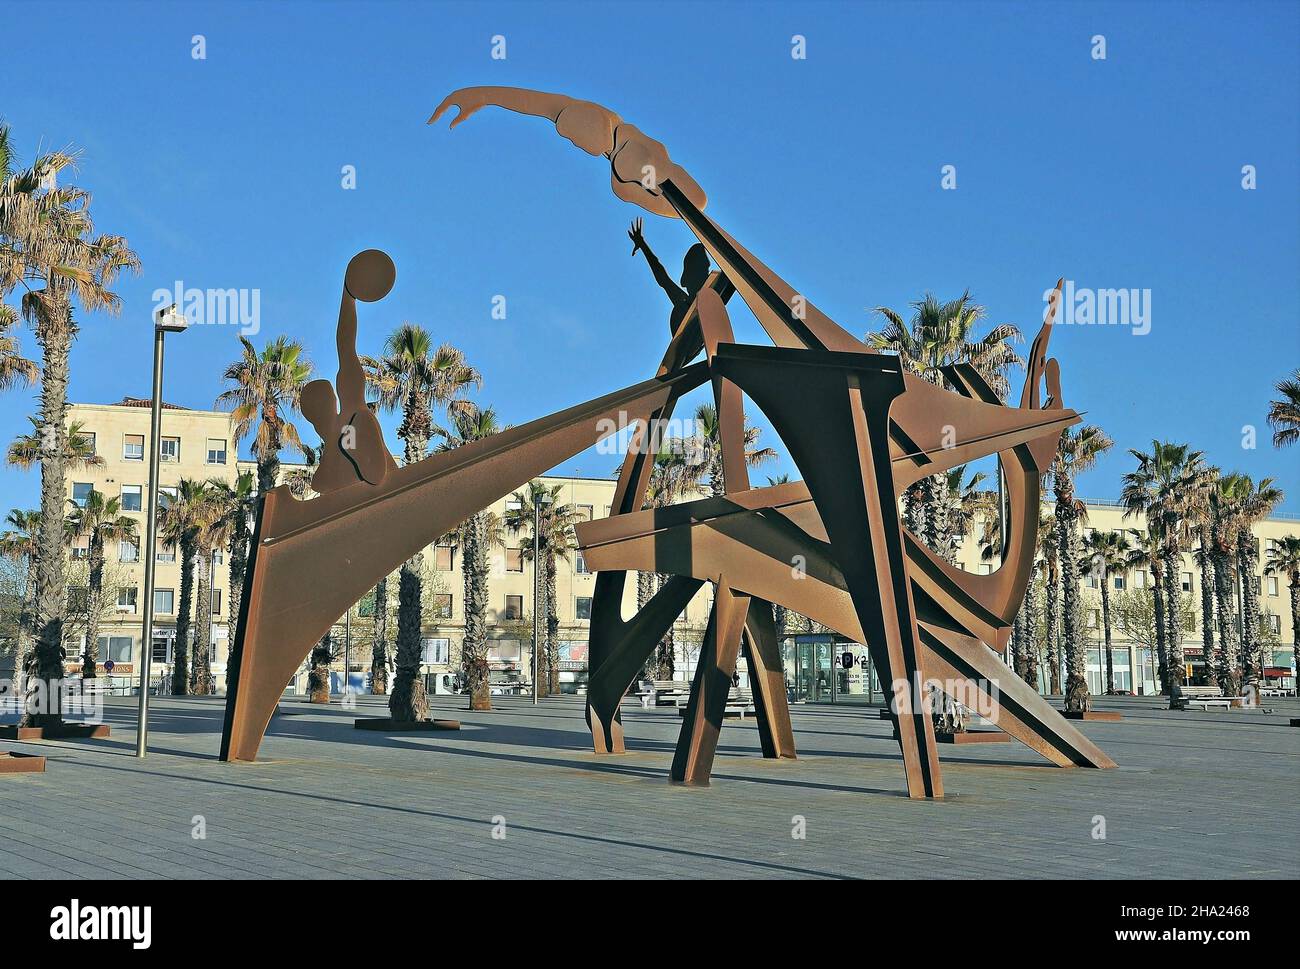 Sculpture Tribute to Swimming in the Barceloneta district of Barcelona, Catalonia, Spain Stock Photo